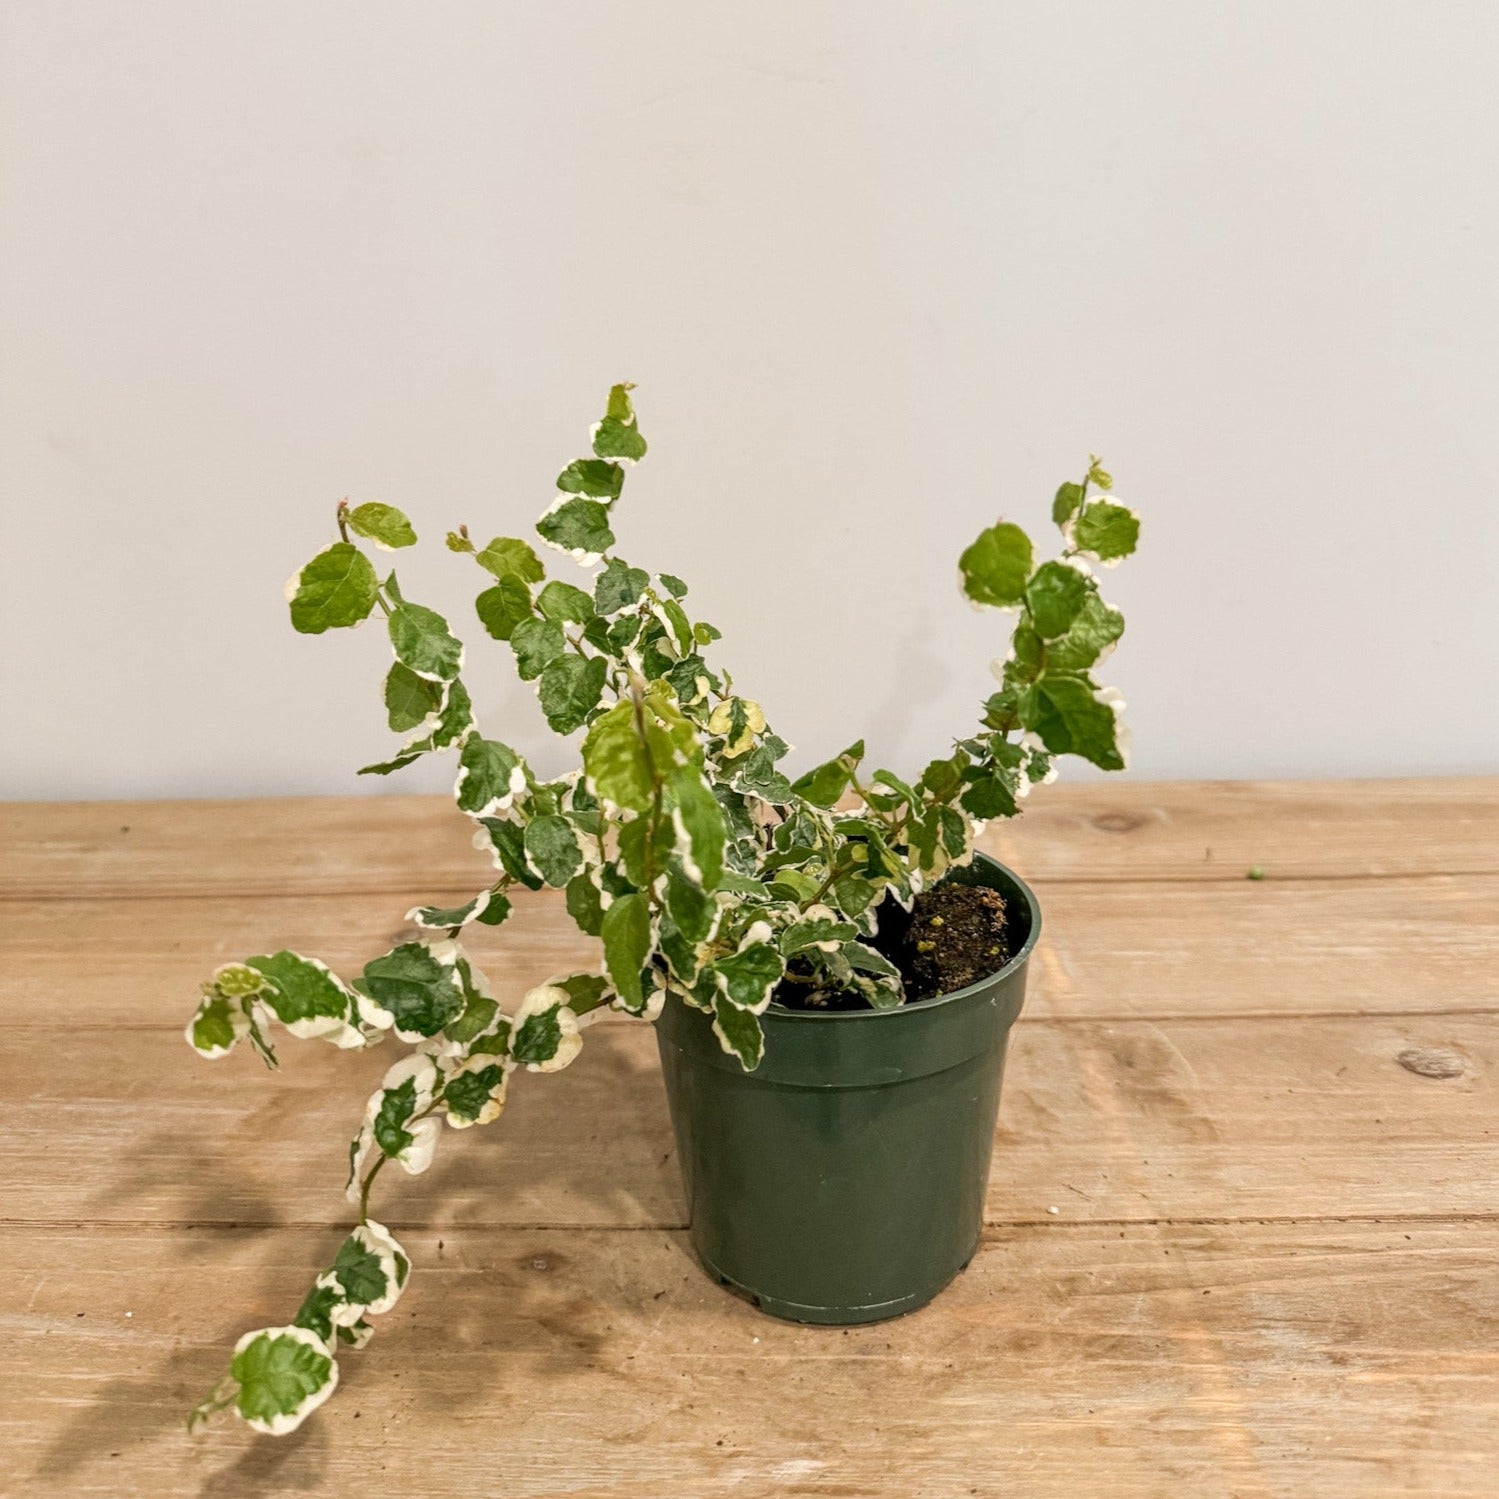 Variegated creeping fig in a pot.